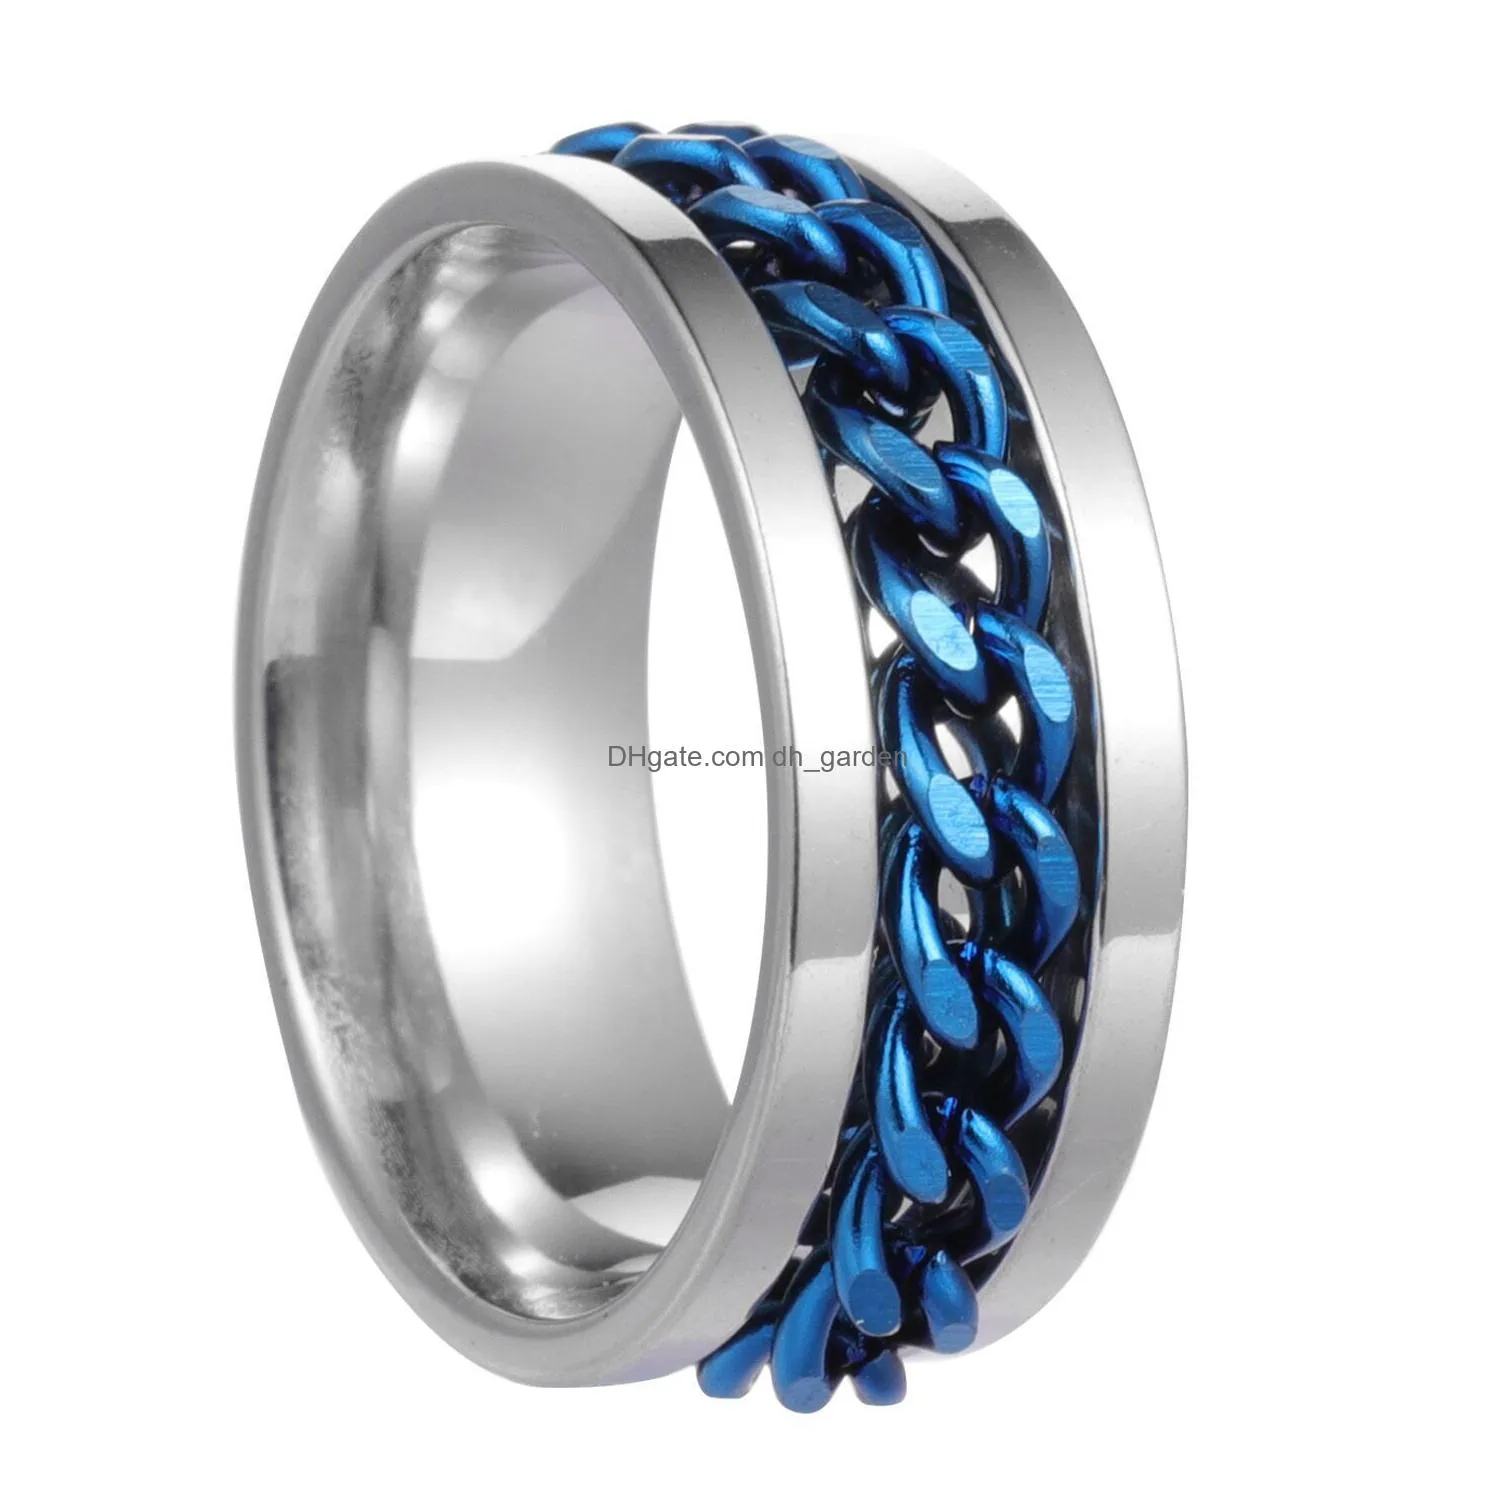 wholesale 40pcs spin chain stainless steel rings silver black gold blue mix men fashion wedding band party gifts jewelry